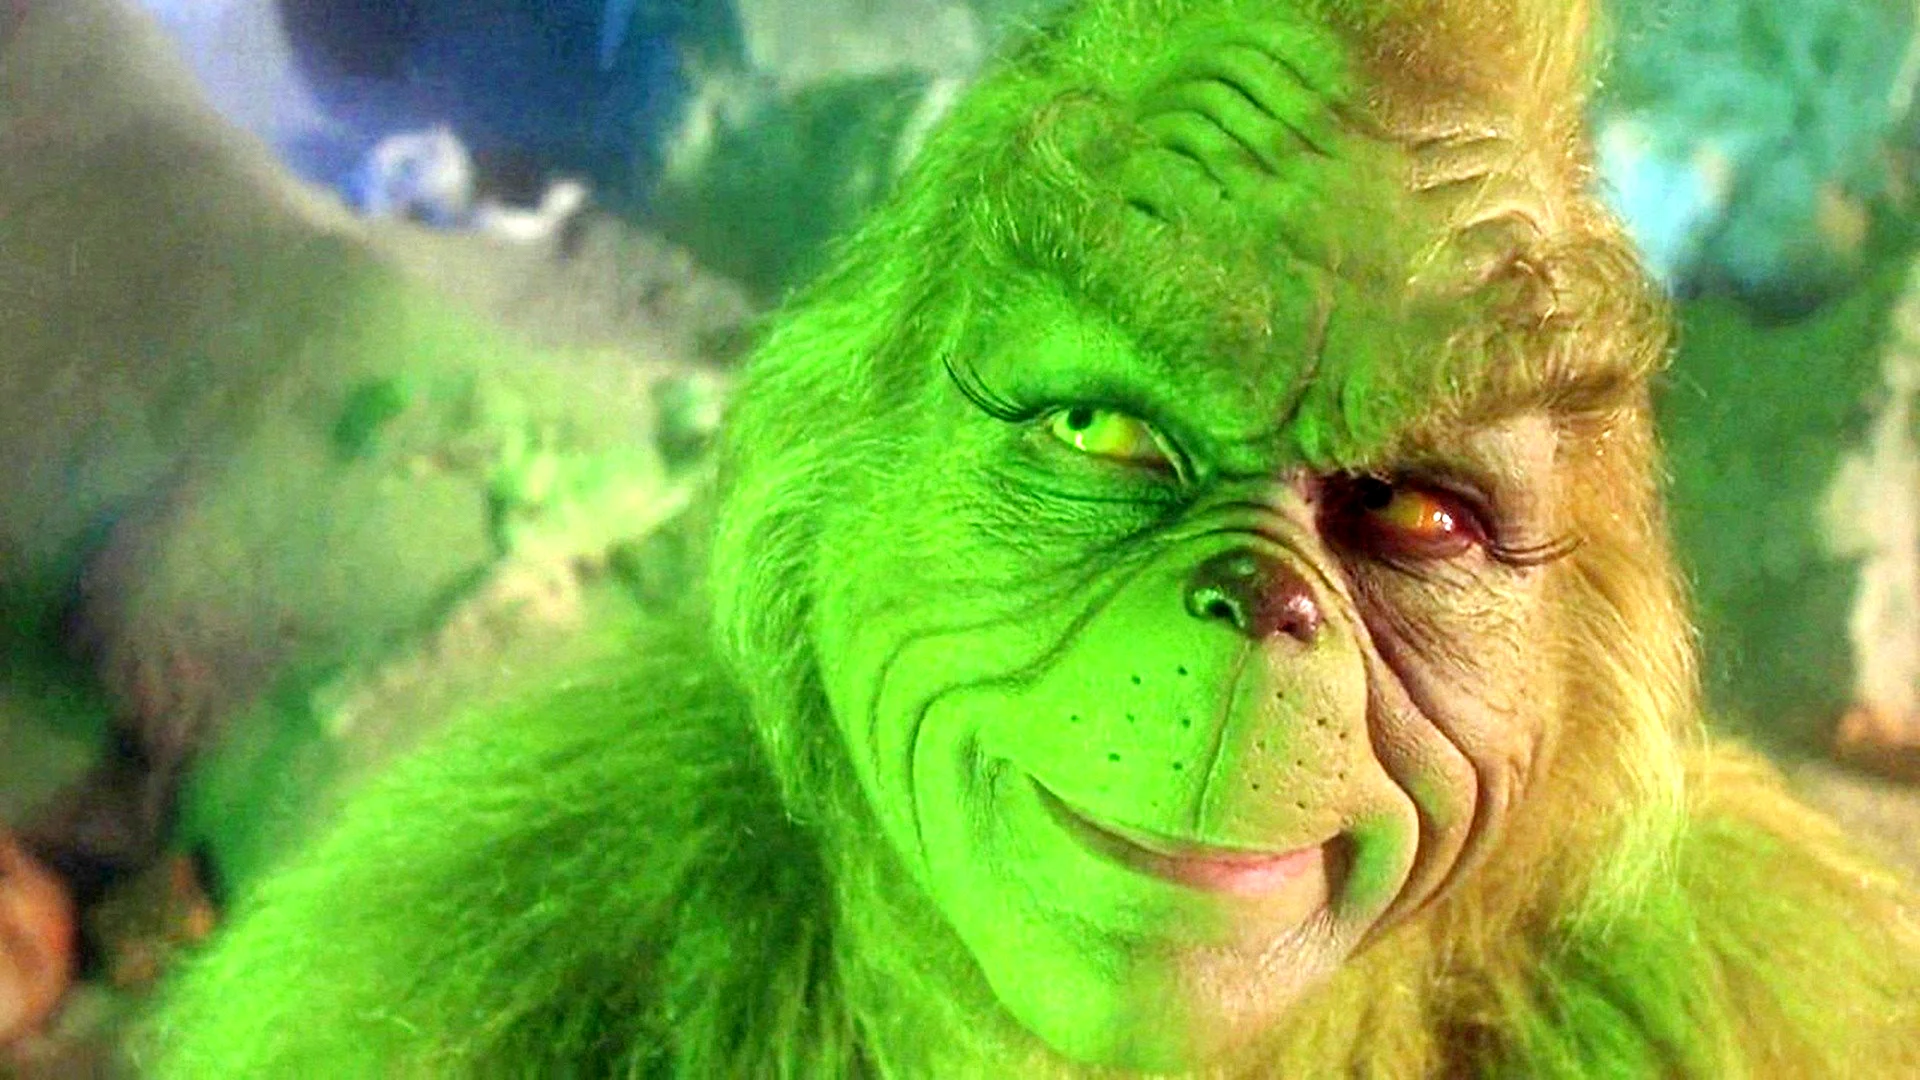 How the Grinch stole Christmas 2000 Wallpaper